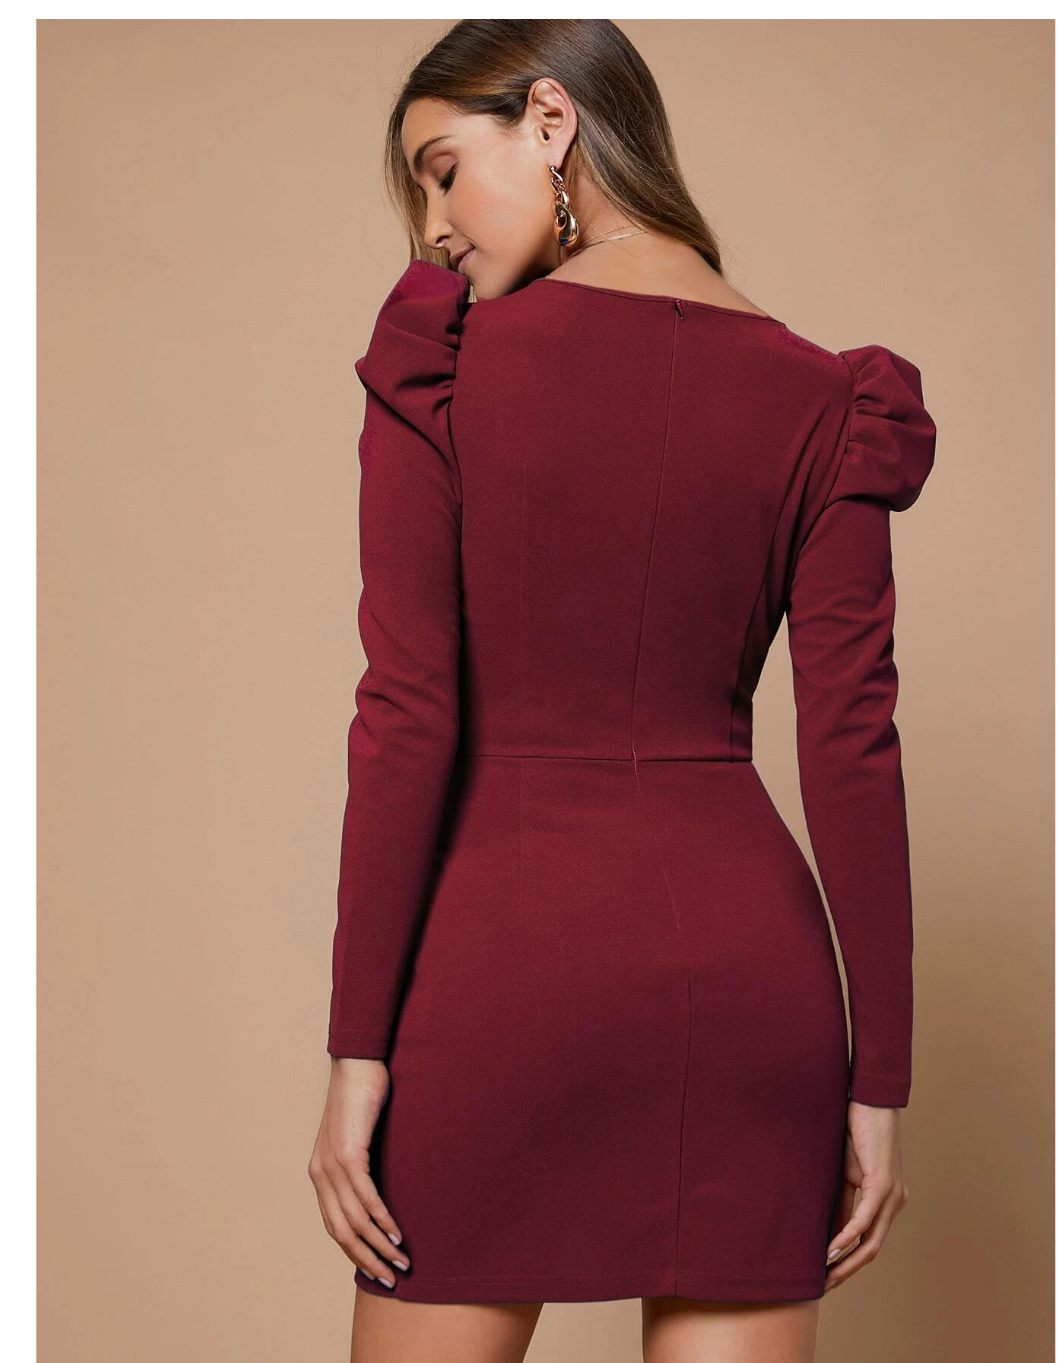 Power Play: BIZwear Solid Gigot Sleeve Dress for the Ultimate Workwear Chic!